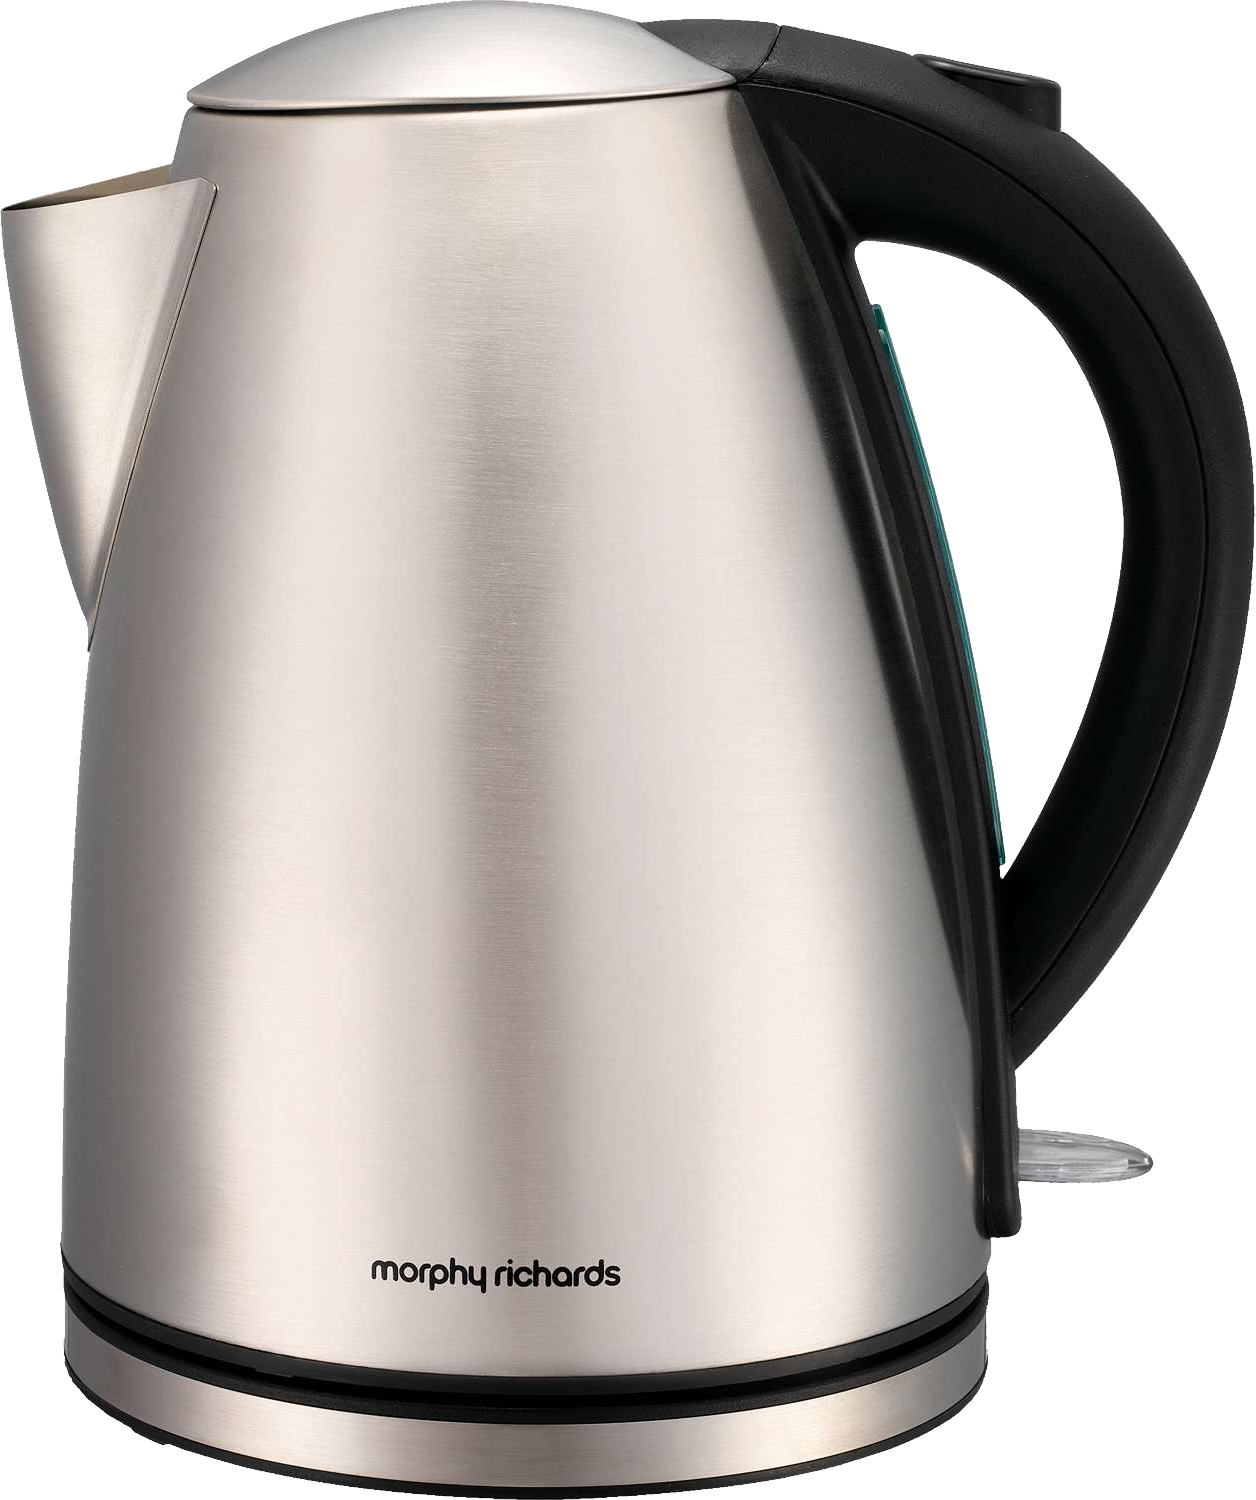 Kettle PNG File